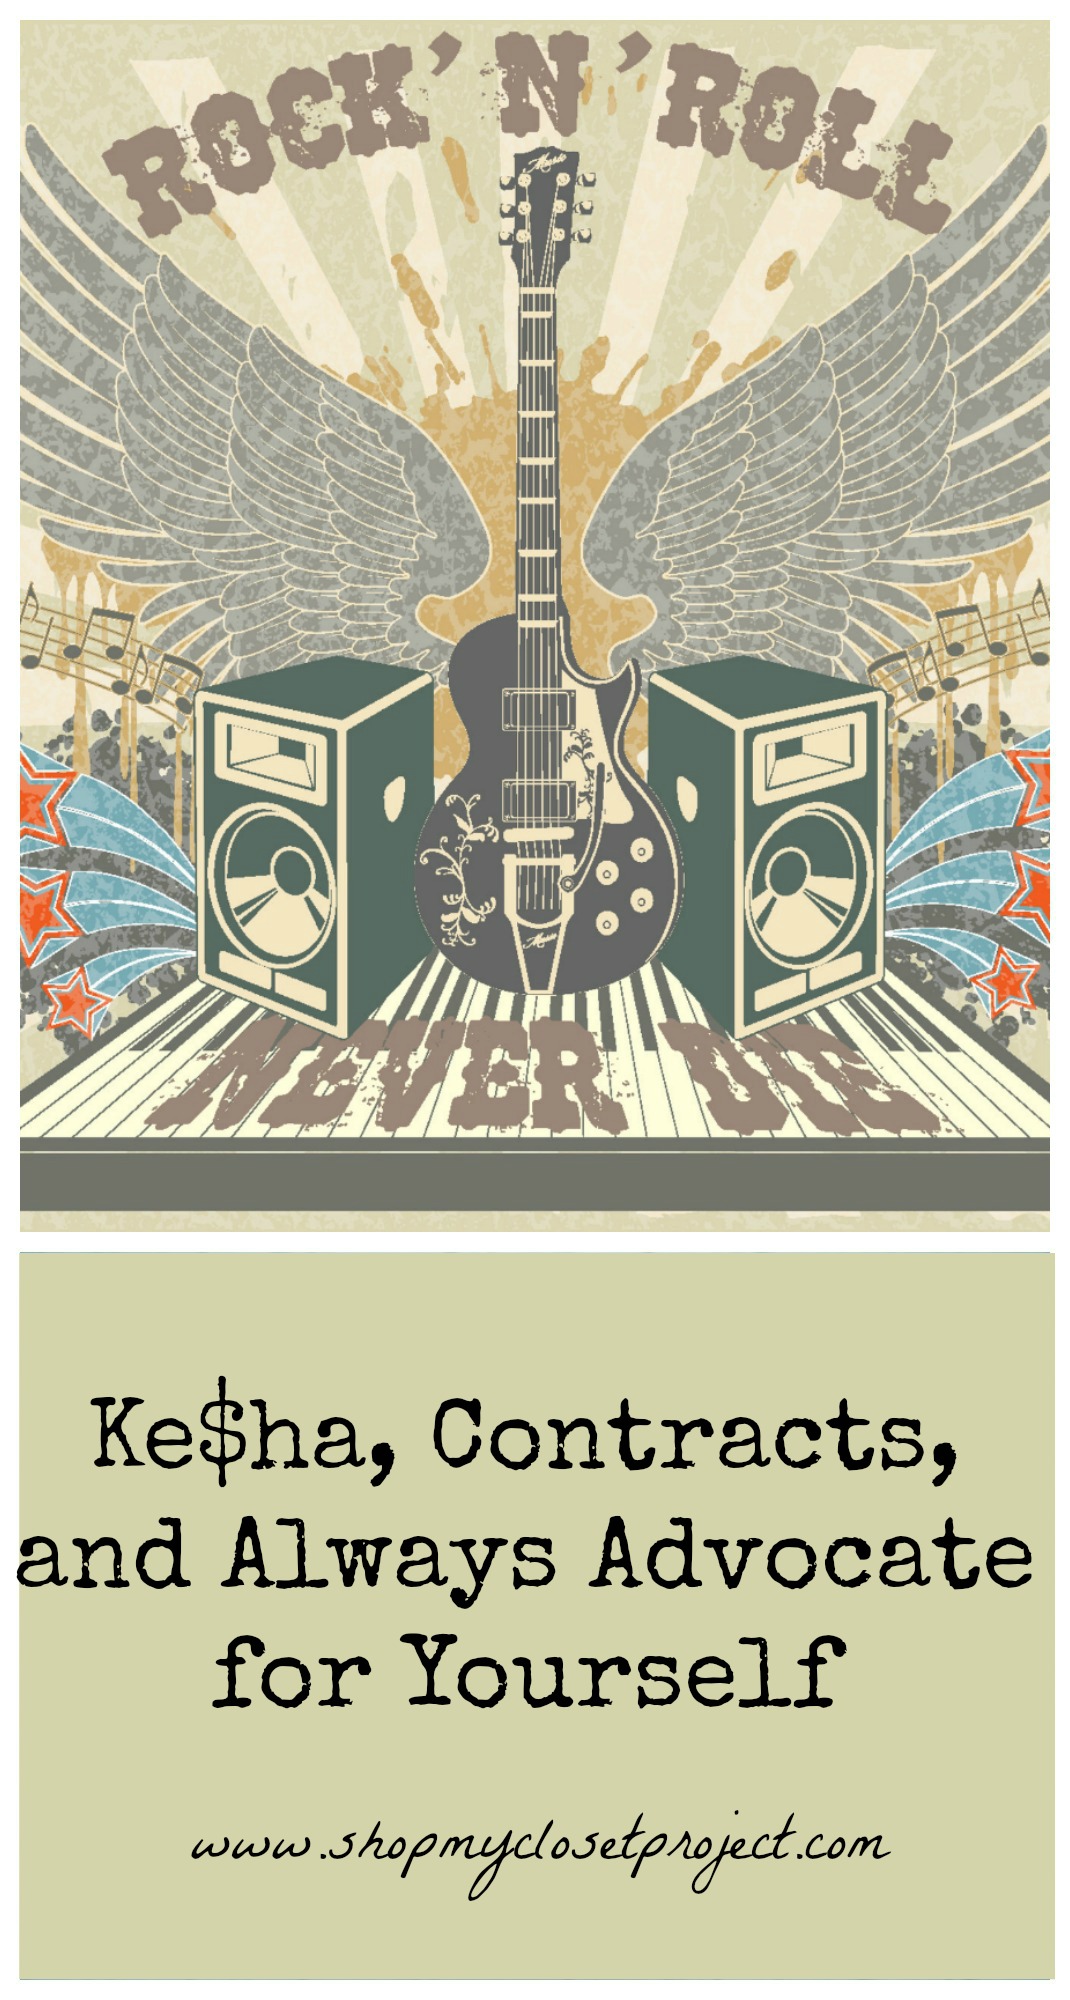 Ke$ha, Contracts, and Always Advocate for Yourself